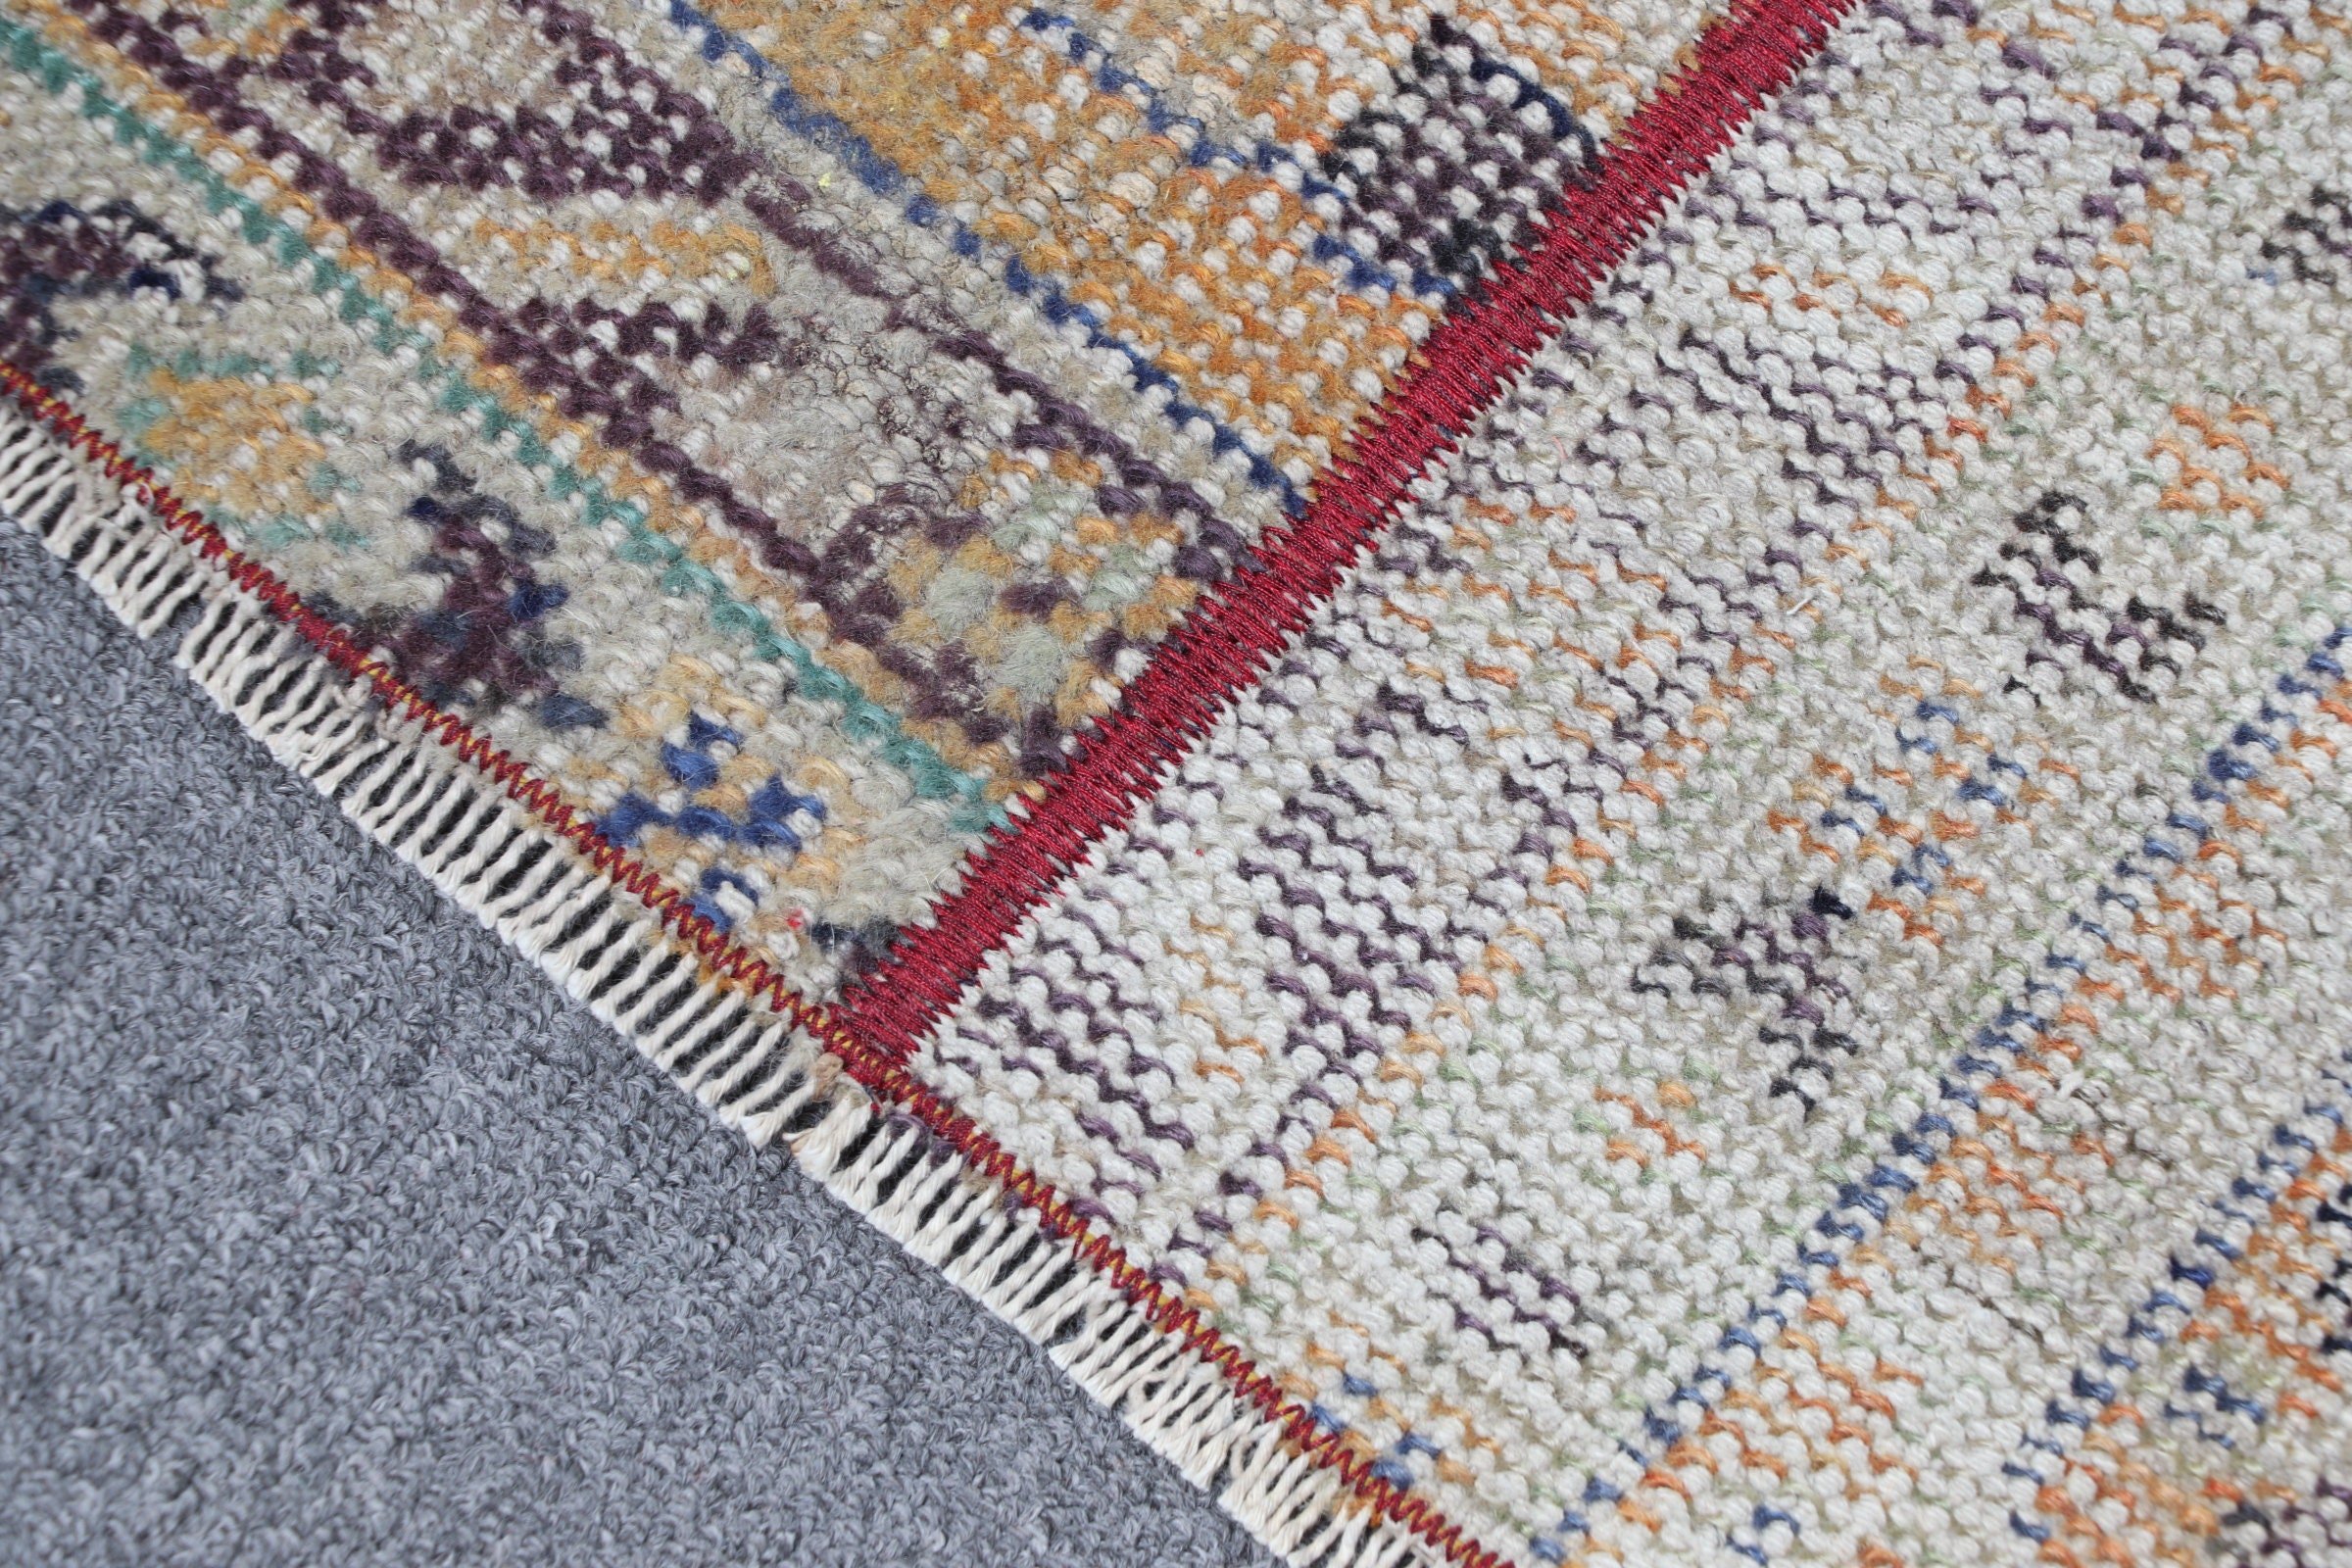 Floor Rug, Rugs for Kitchen, Turkish Rug, Bright Rug, Bathroom Rug, 2.1x2.8 ft Small Rugs, Vintage Rugs, Yellow Moroccan Rugs